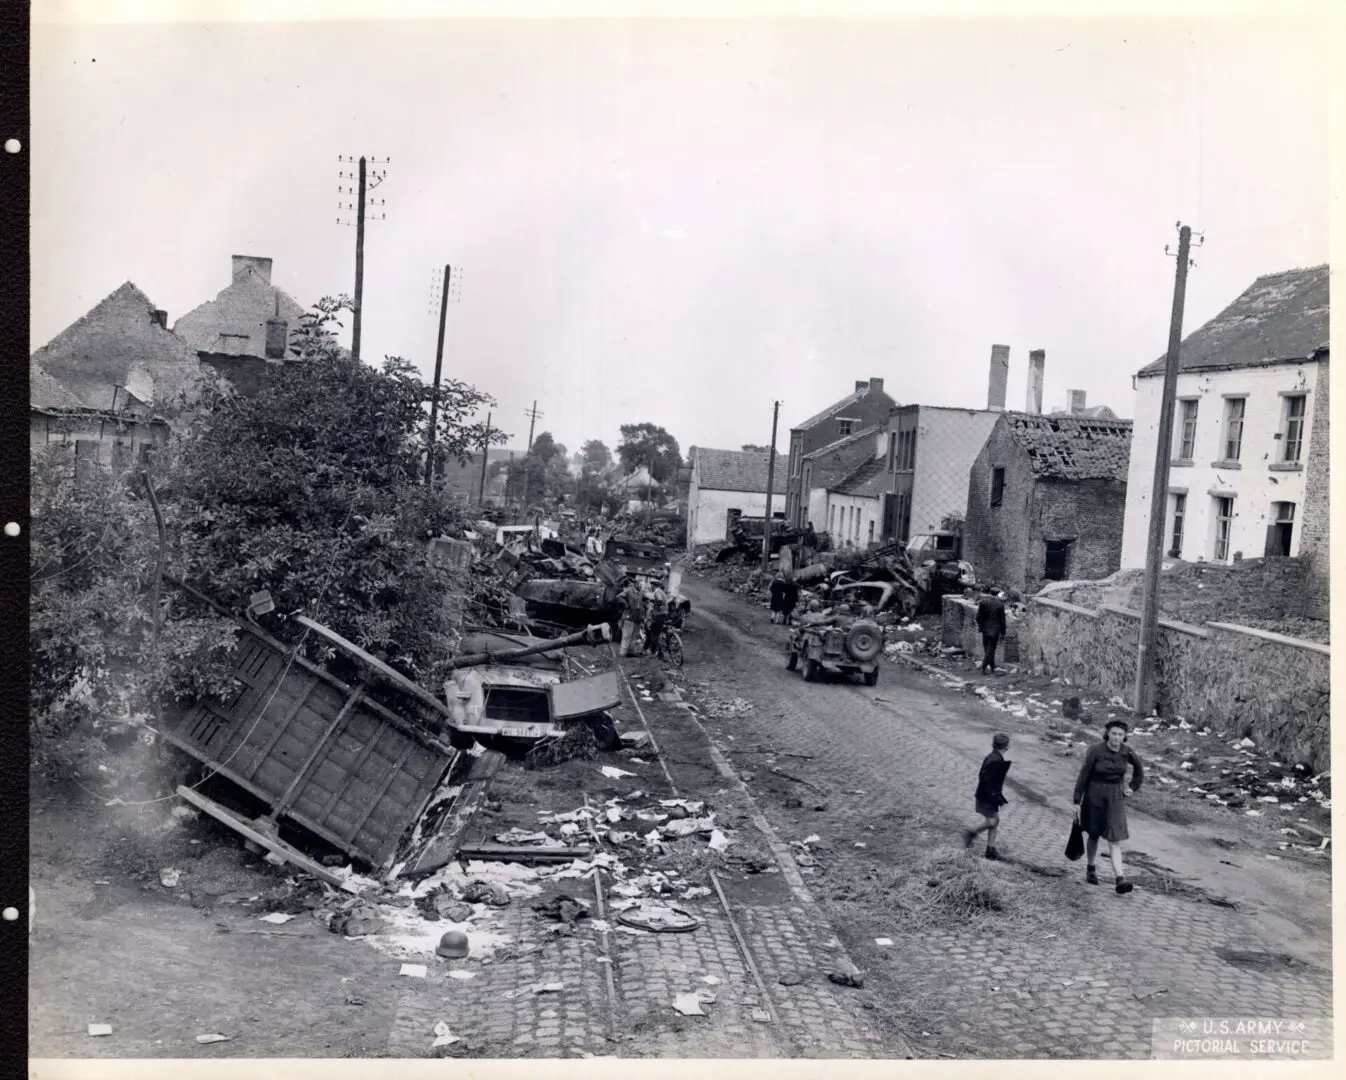 Wrecked German vehicles being removed from the streets